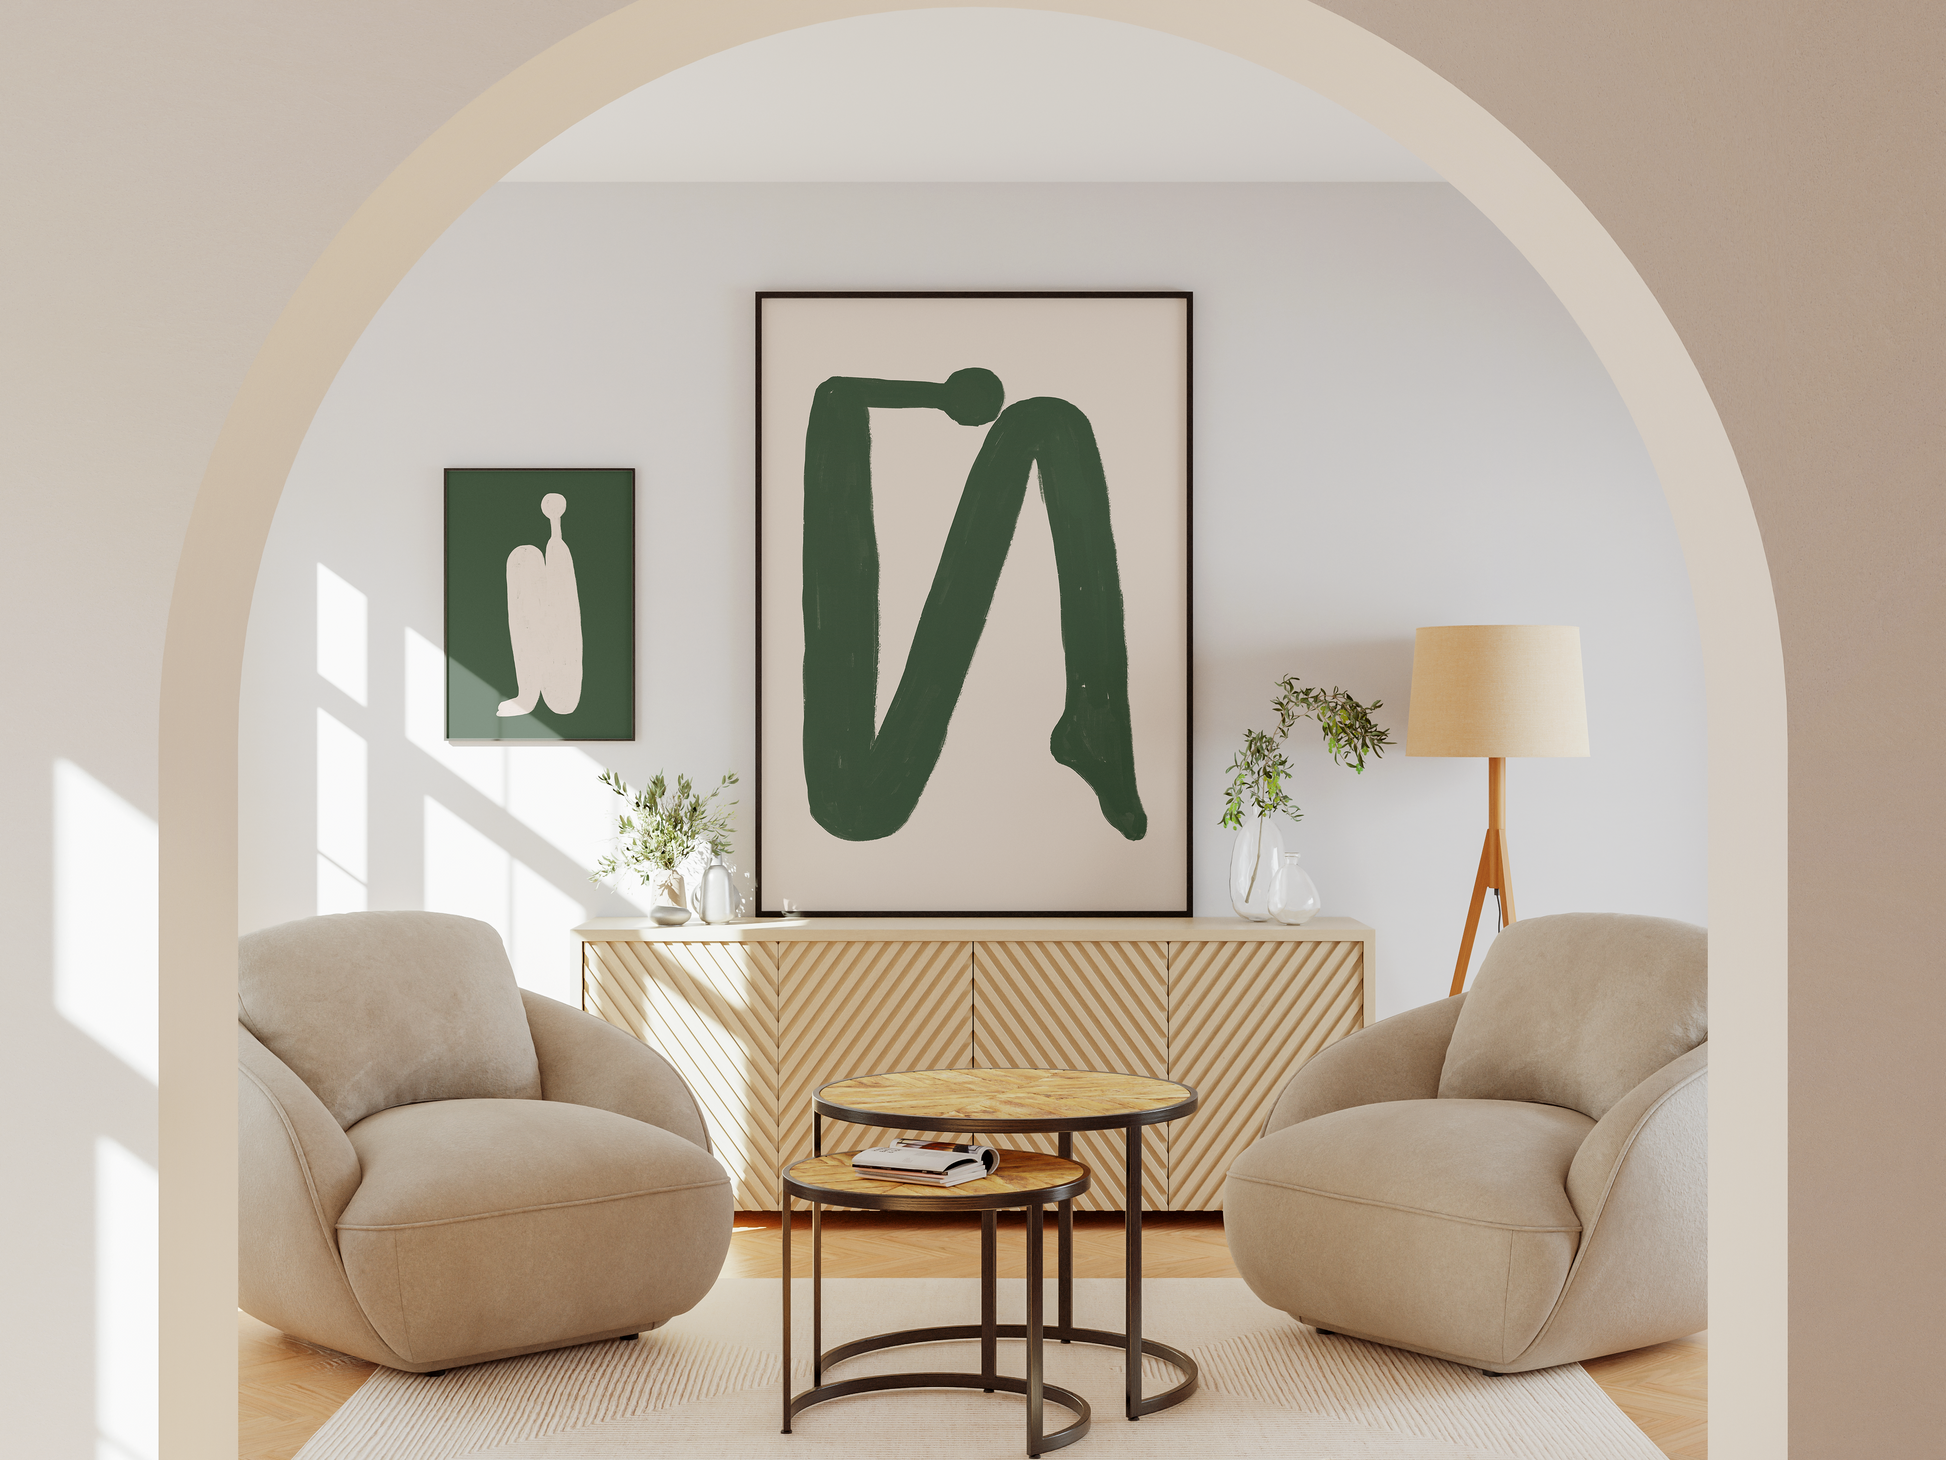 A cozy sitting area featuring two plush chairs with a large abstract green painting over a chevron console table, flanked by a smaller piece with a minimalist white figure